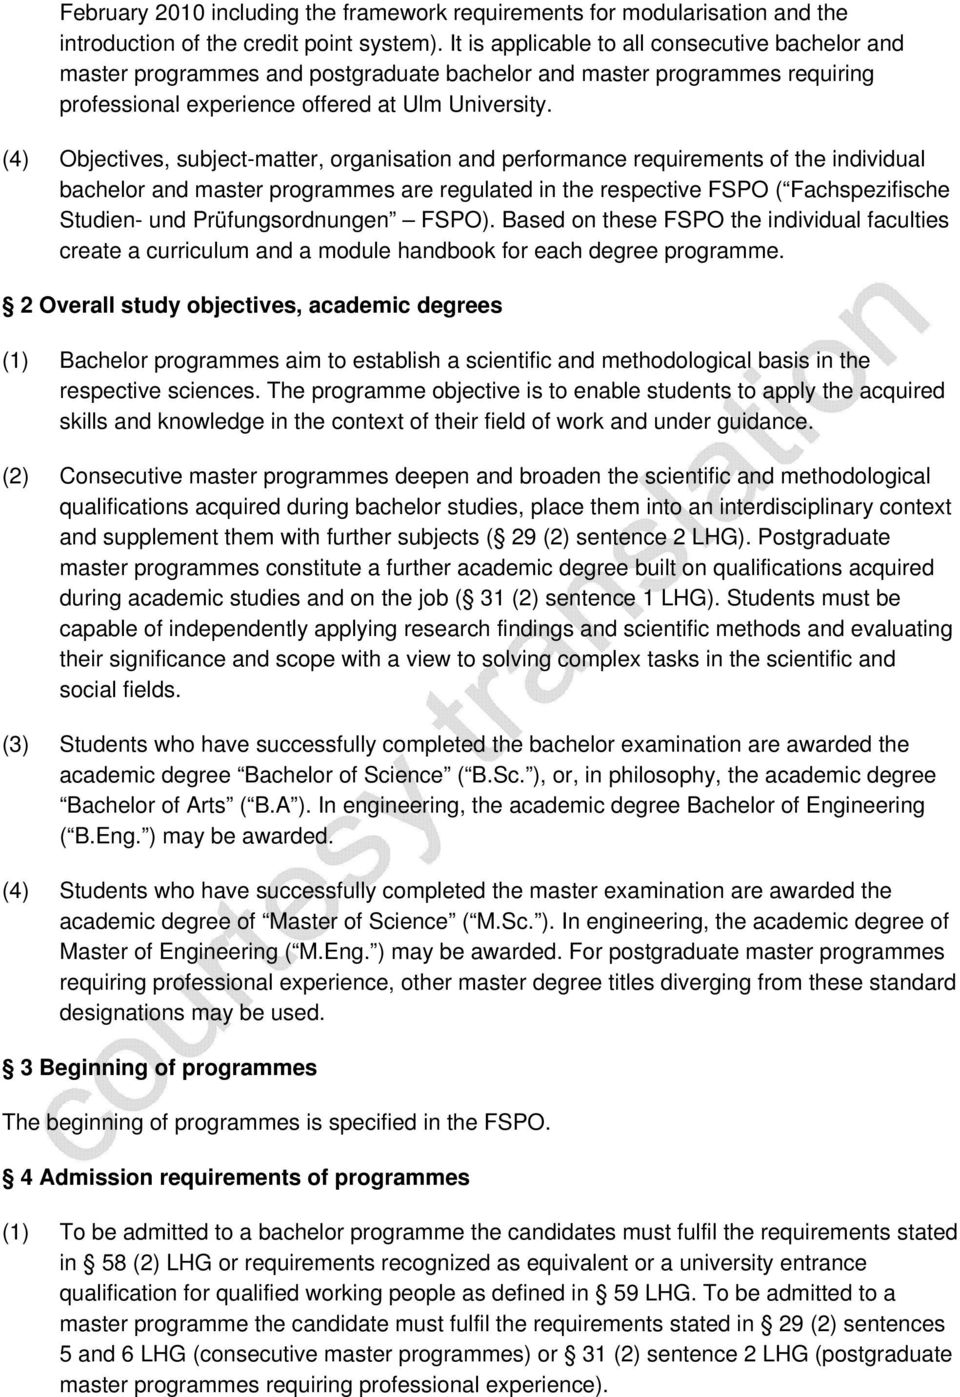 (4) Objectives, subject-matter, organisation and performance requirements of the individual bachelor and master programmes are regulated in the respective FSPO ( Fachspezifische Studien- und